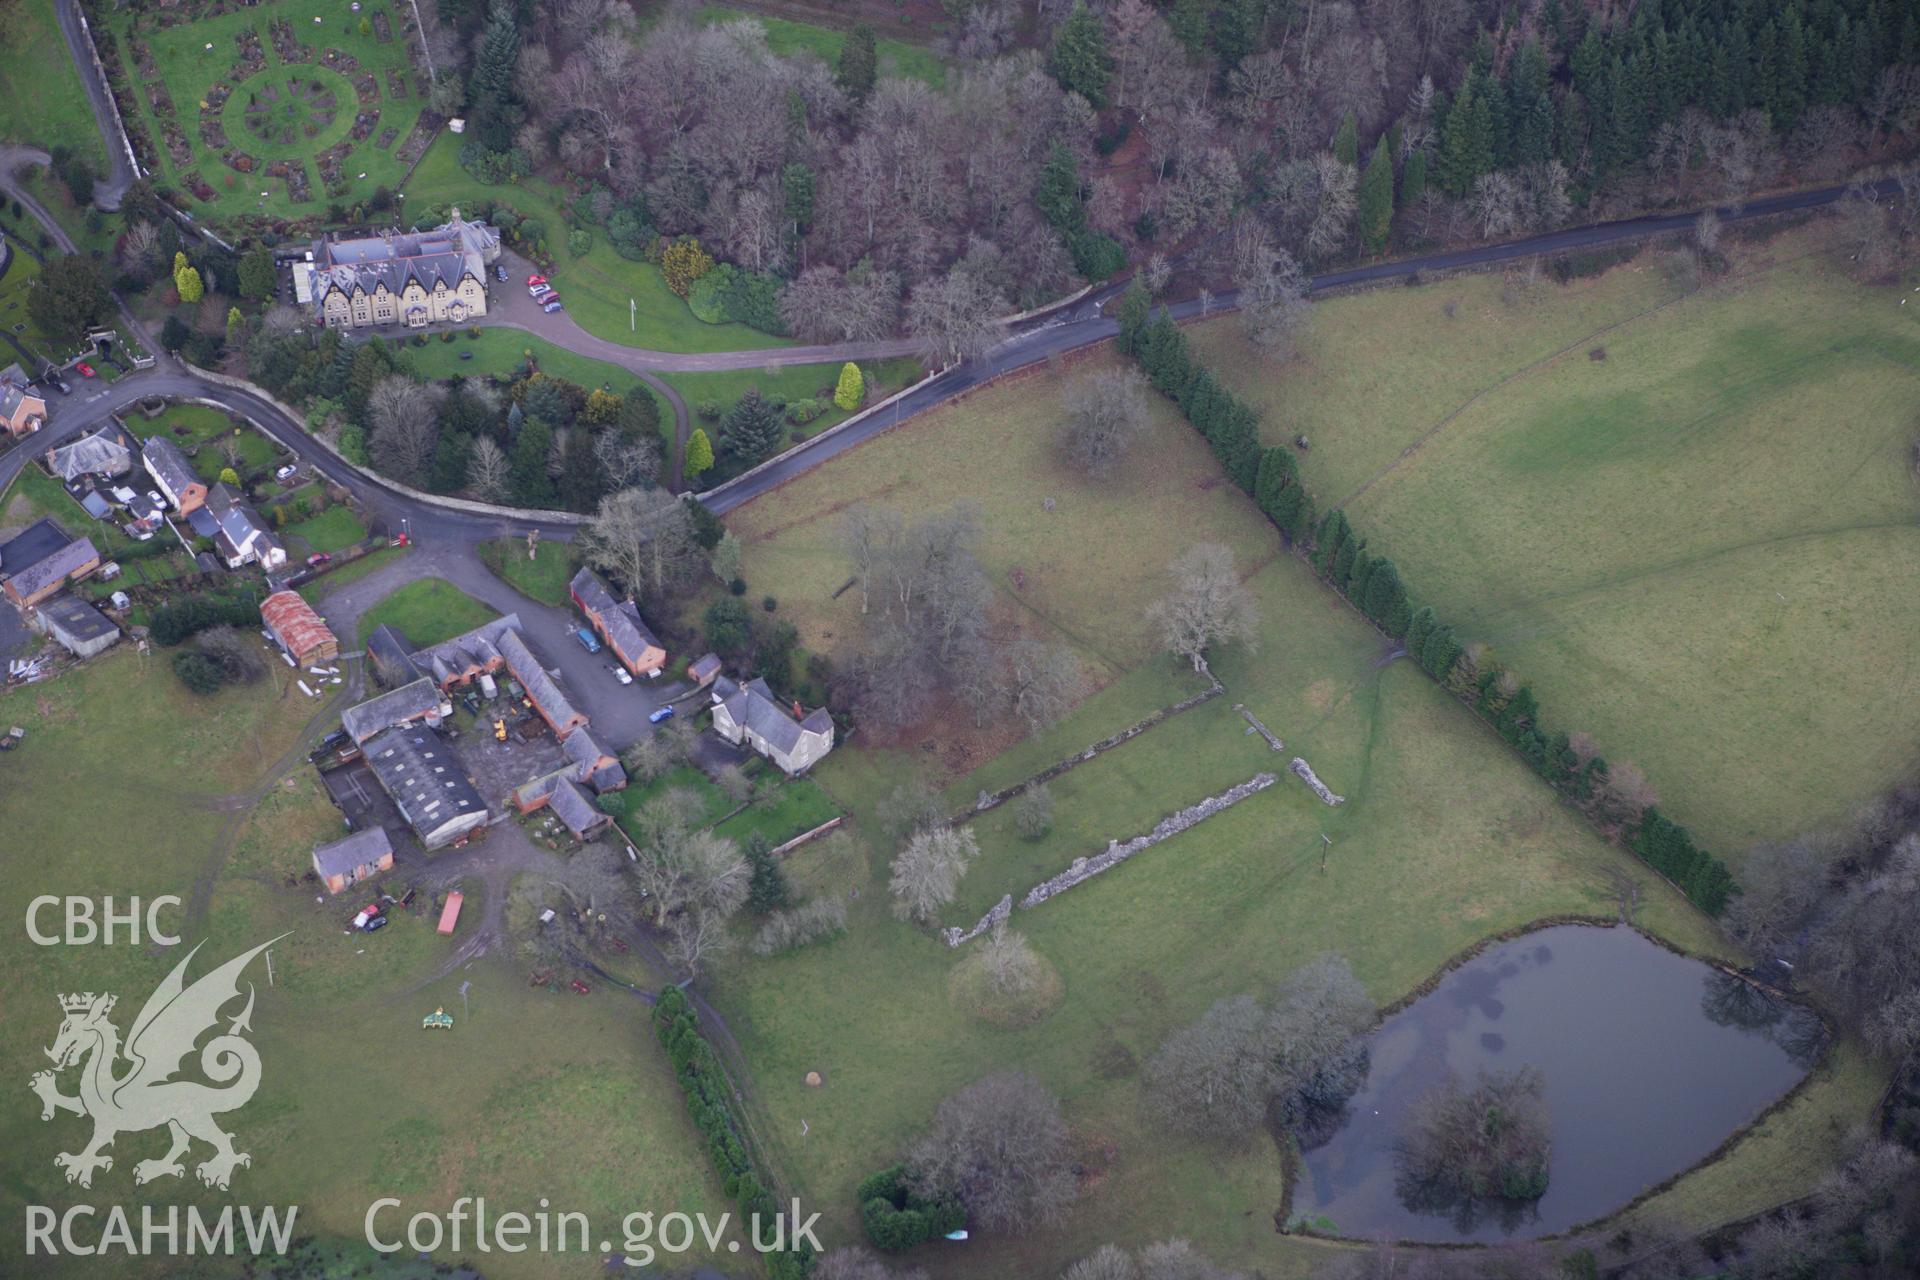 RCAHMW colour oblique aerial photograph of Abbey Cwmhir. Taken on 10 December 2009 by Toby Driver